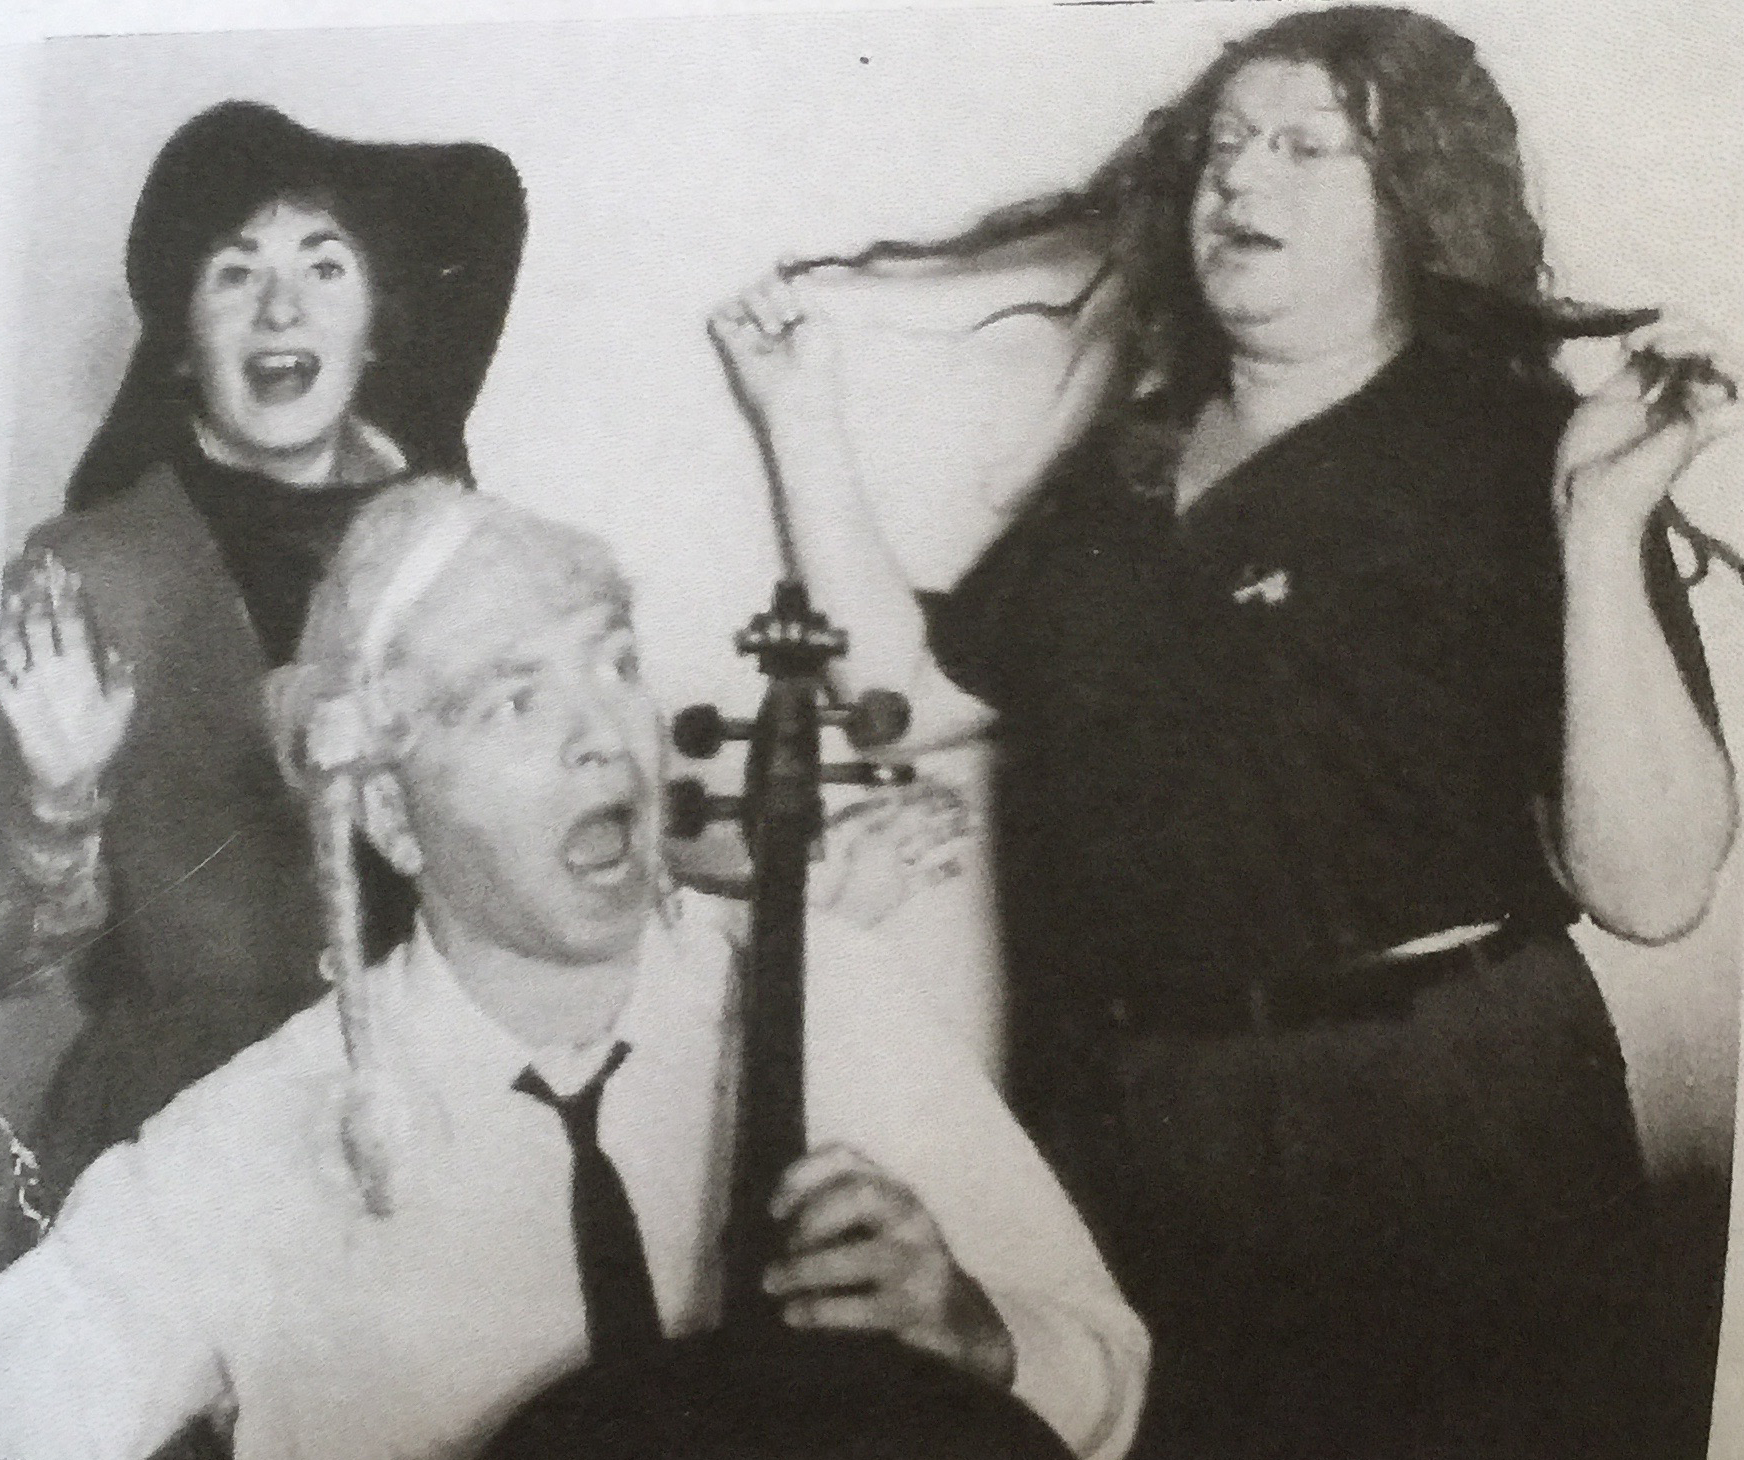 Ben Weber in a wig with Seymour Barab playing a cello and an unidentified woman.